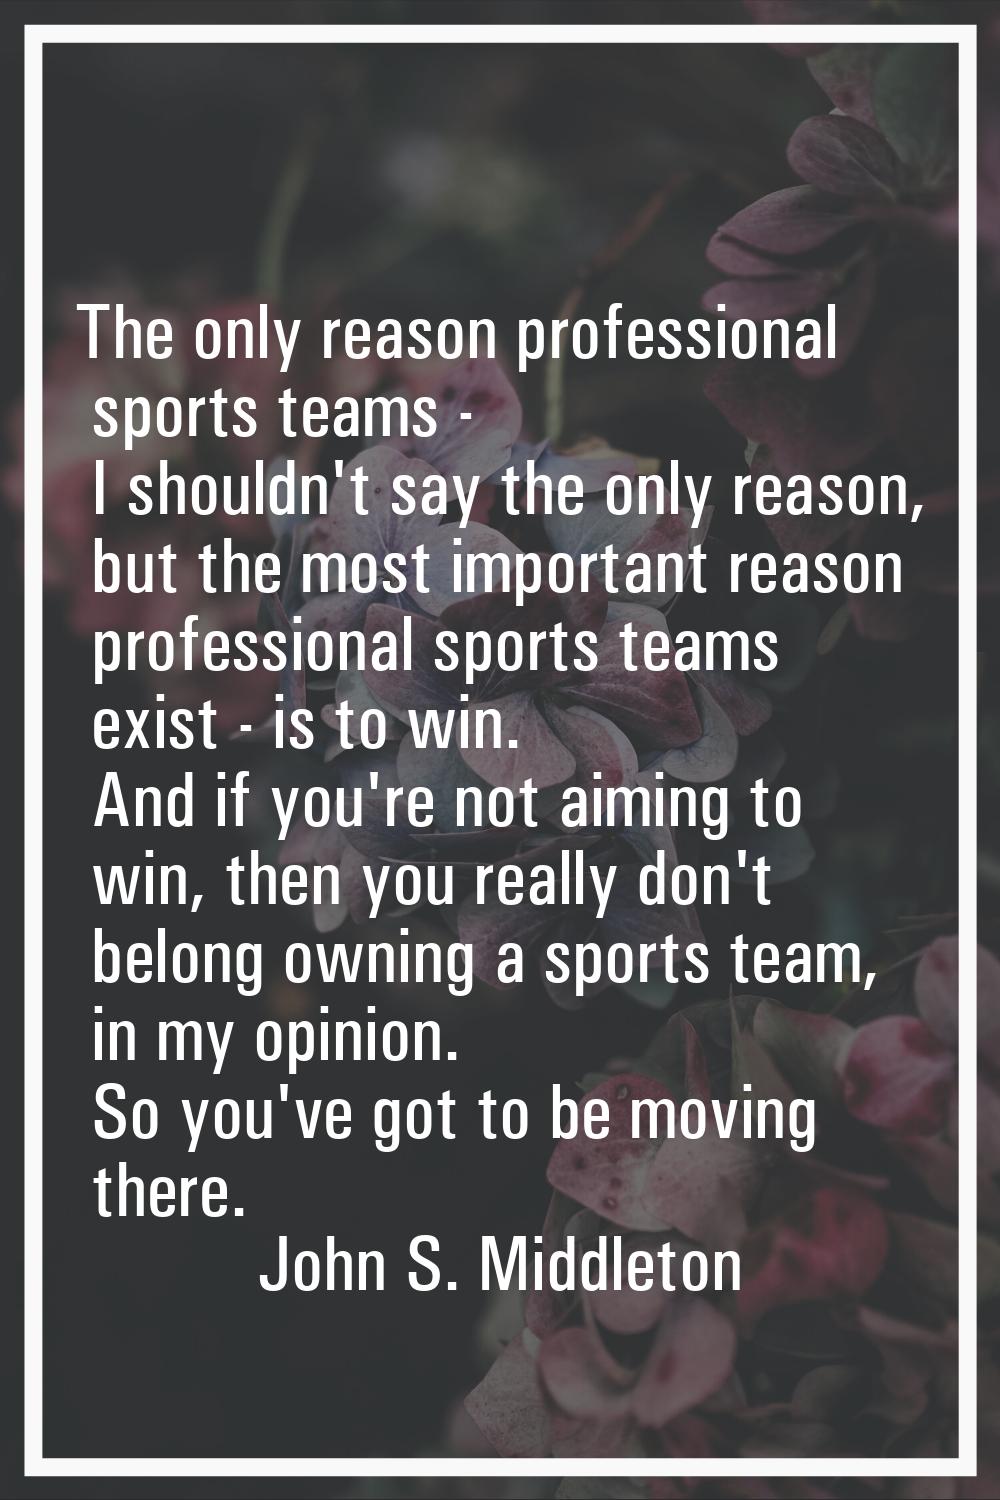 The only reason professional sports teams - I shouldn't say the only reason, but the most important